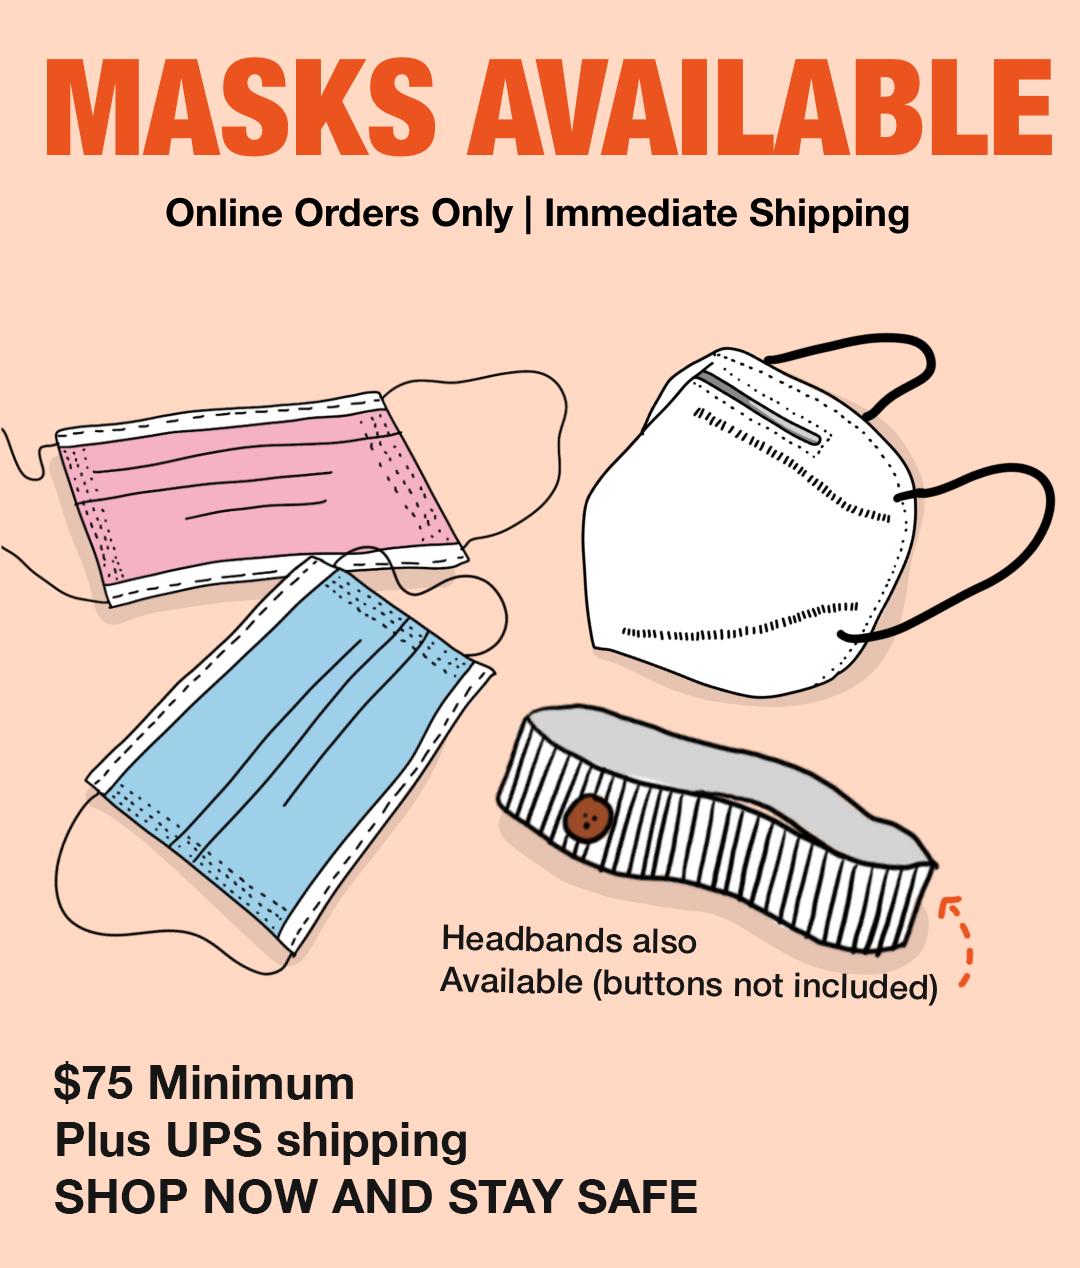 Masks Available